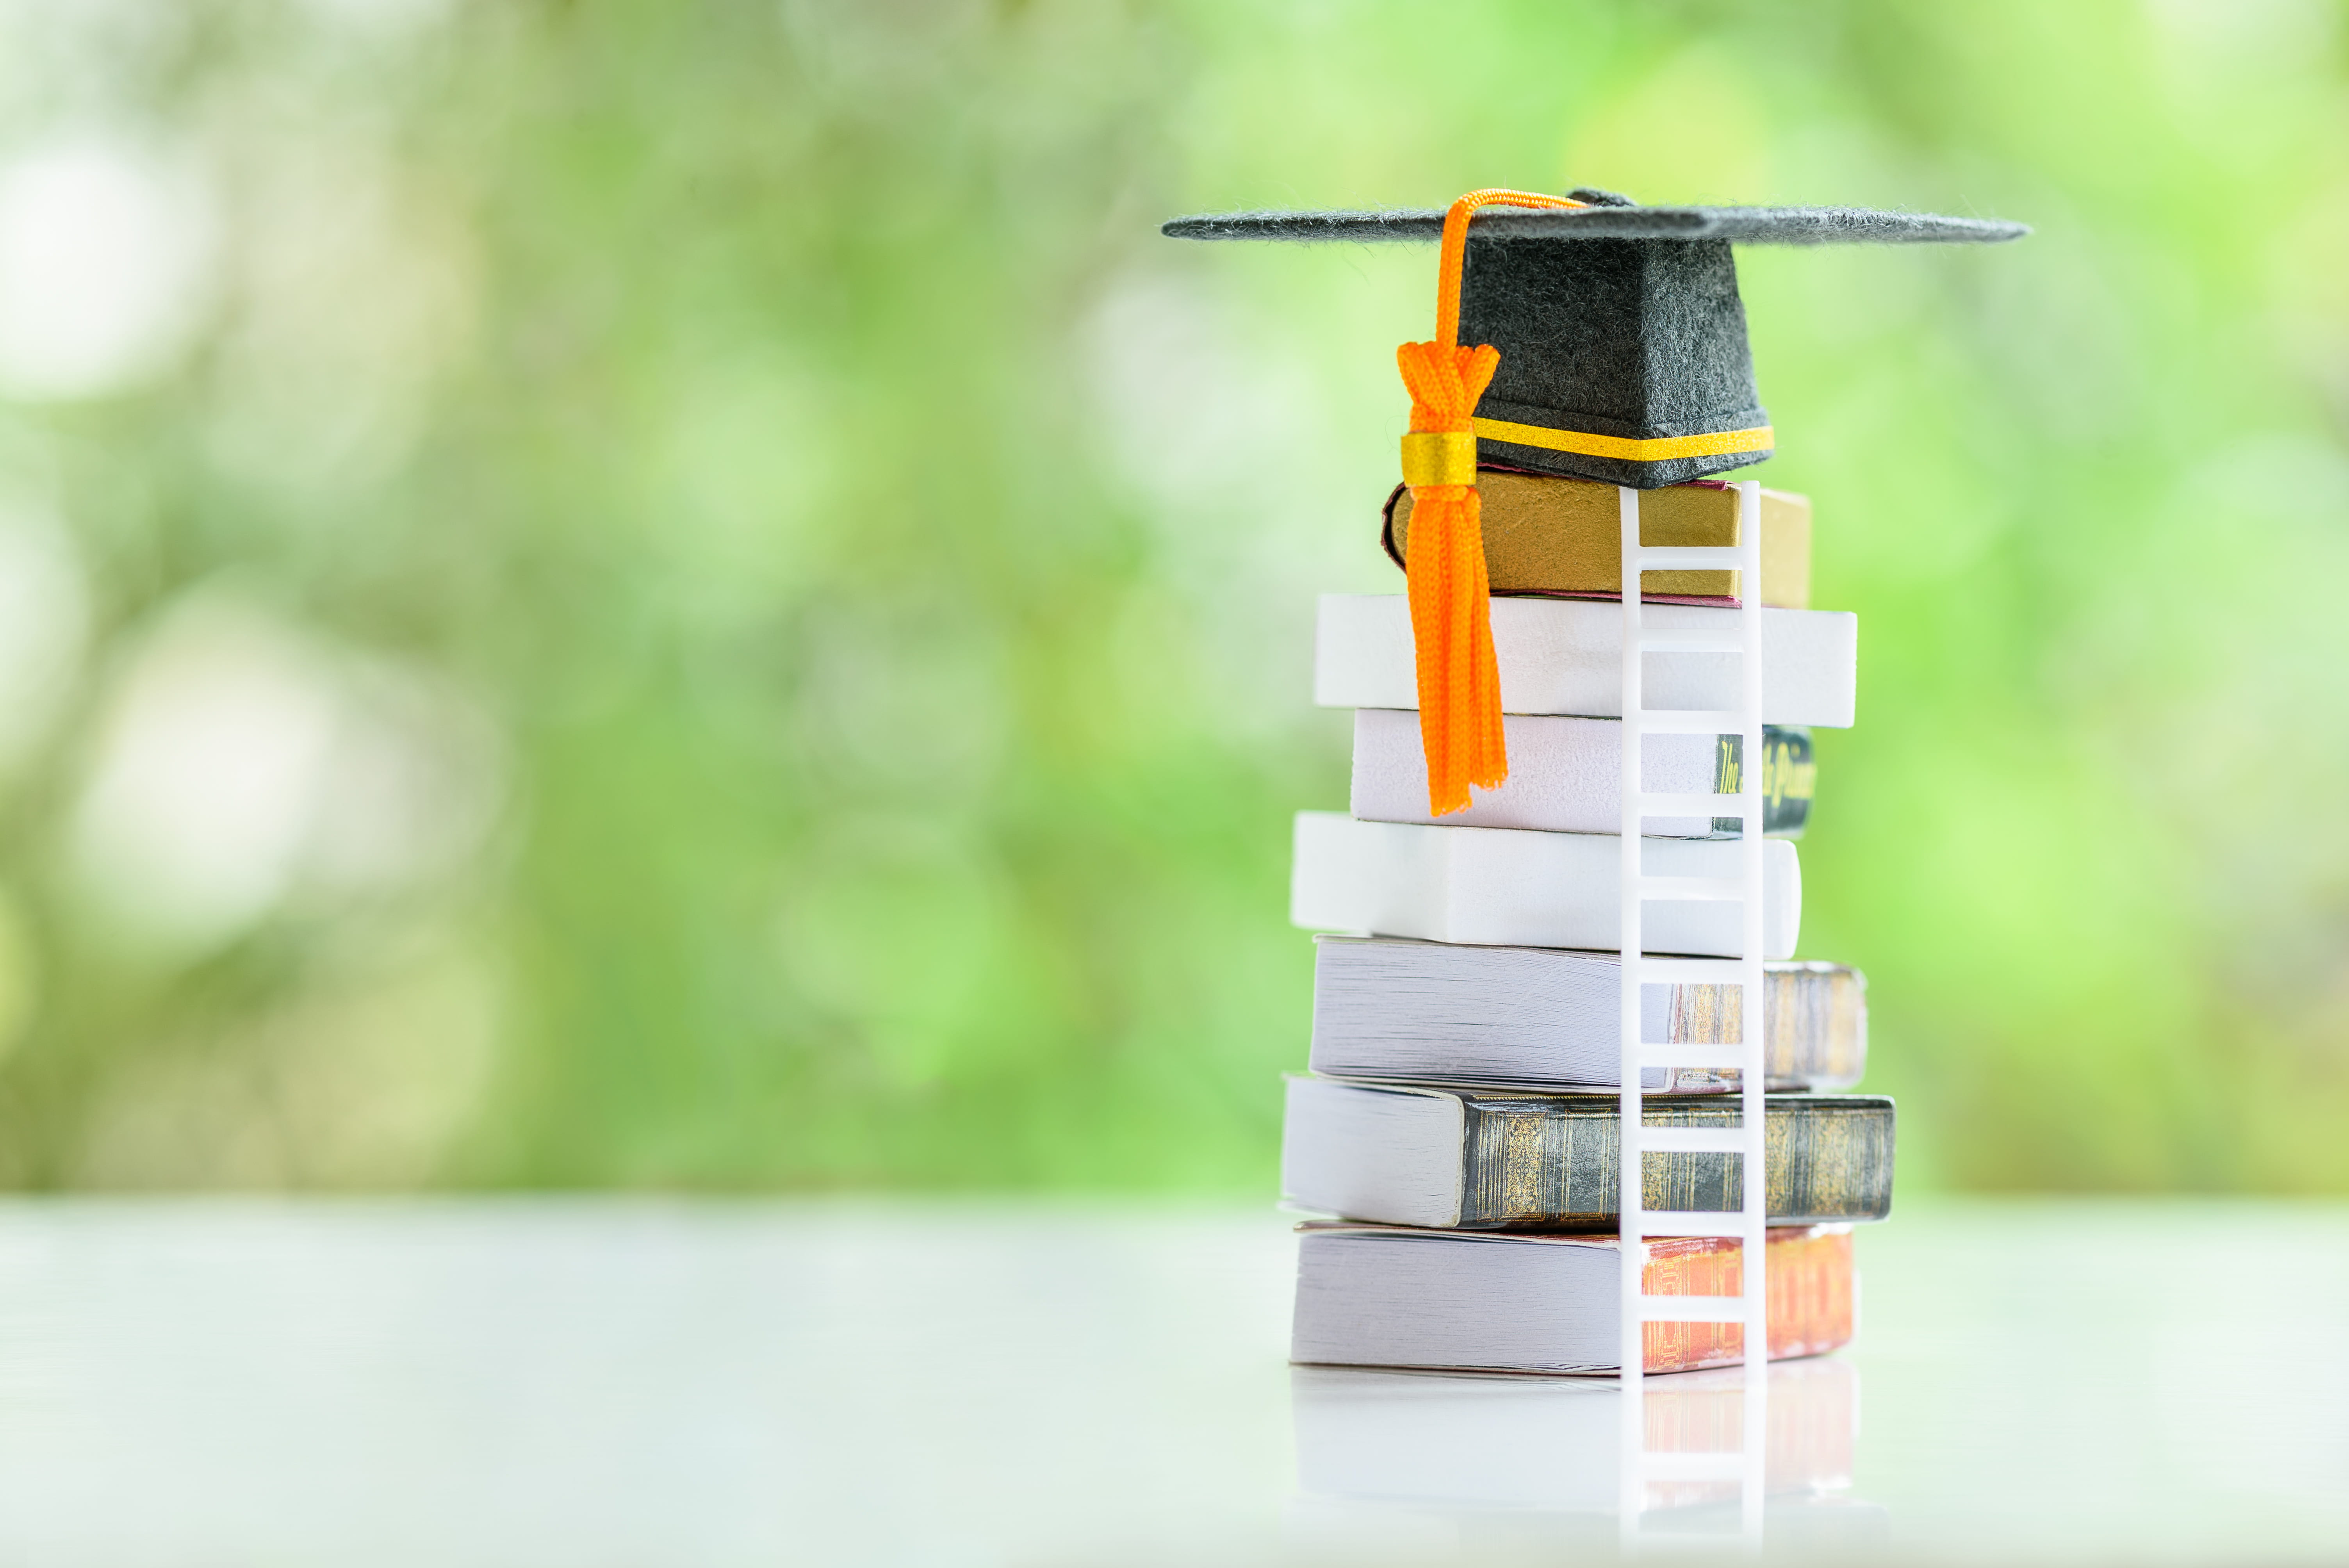 Graduation cap on top of a stack of books with a ladder leading to the top